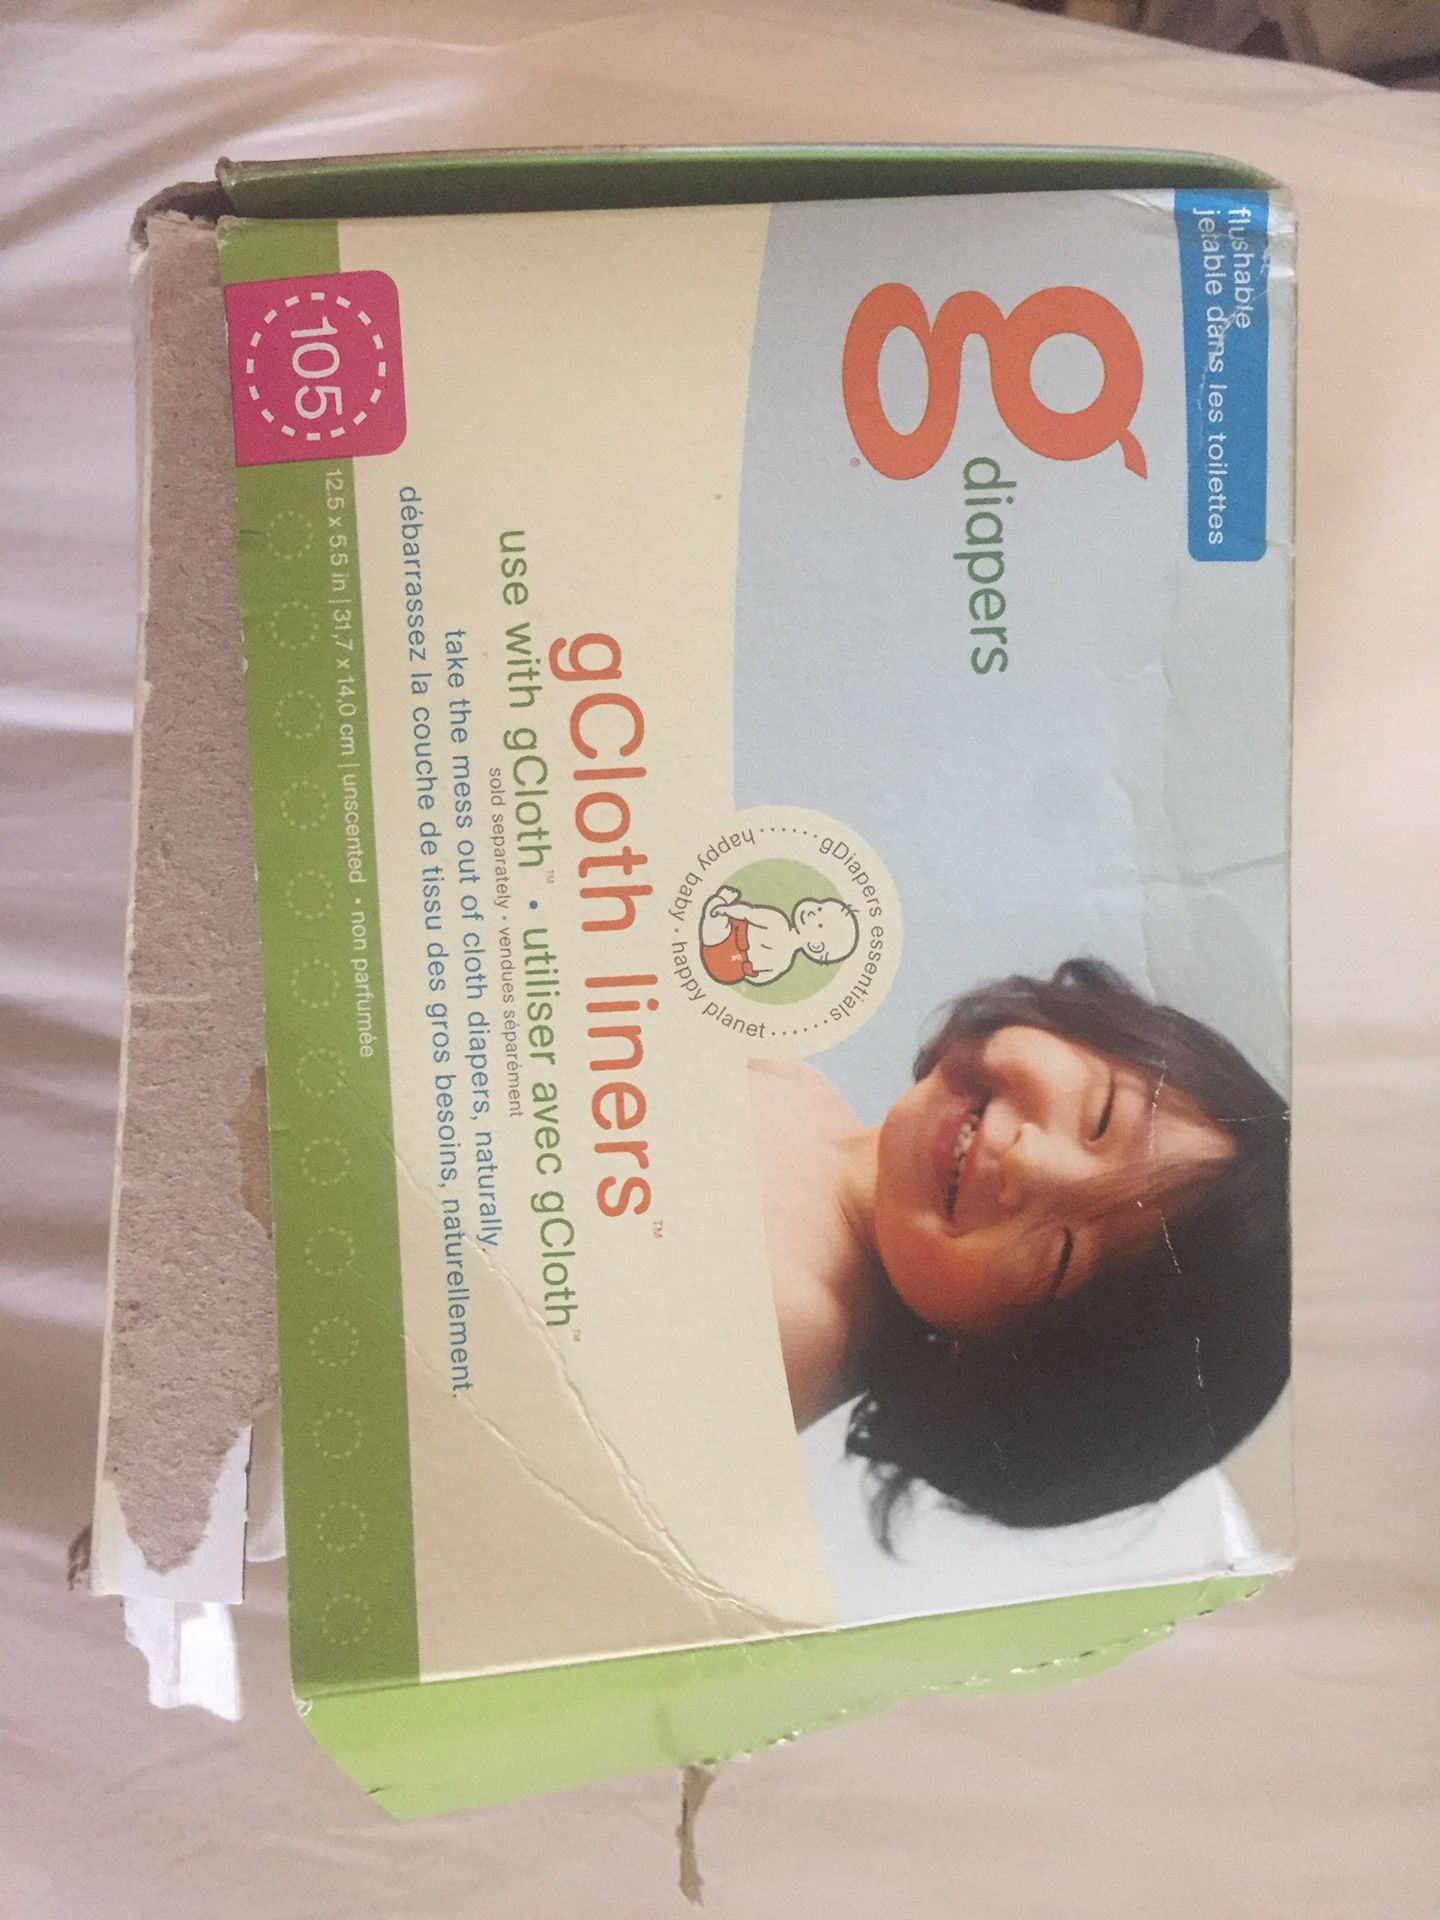 GCloth cloth diaper liners flushable brand new